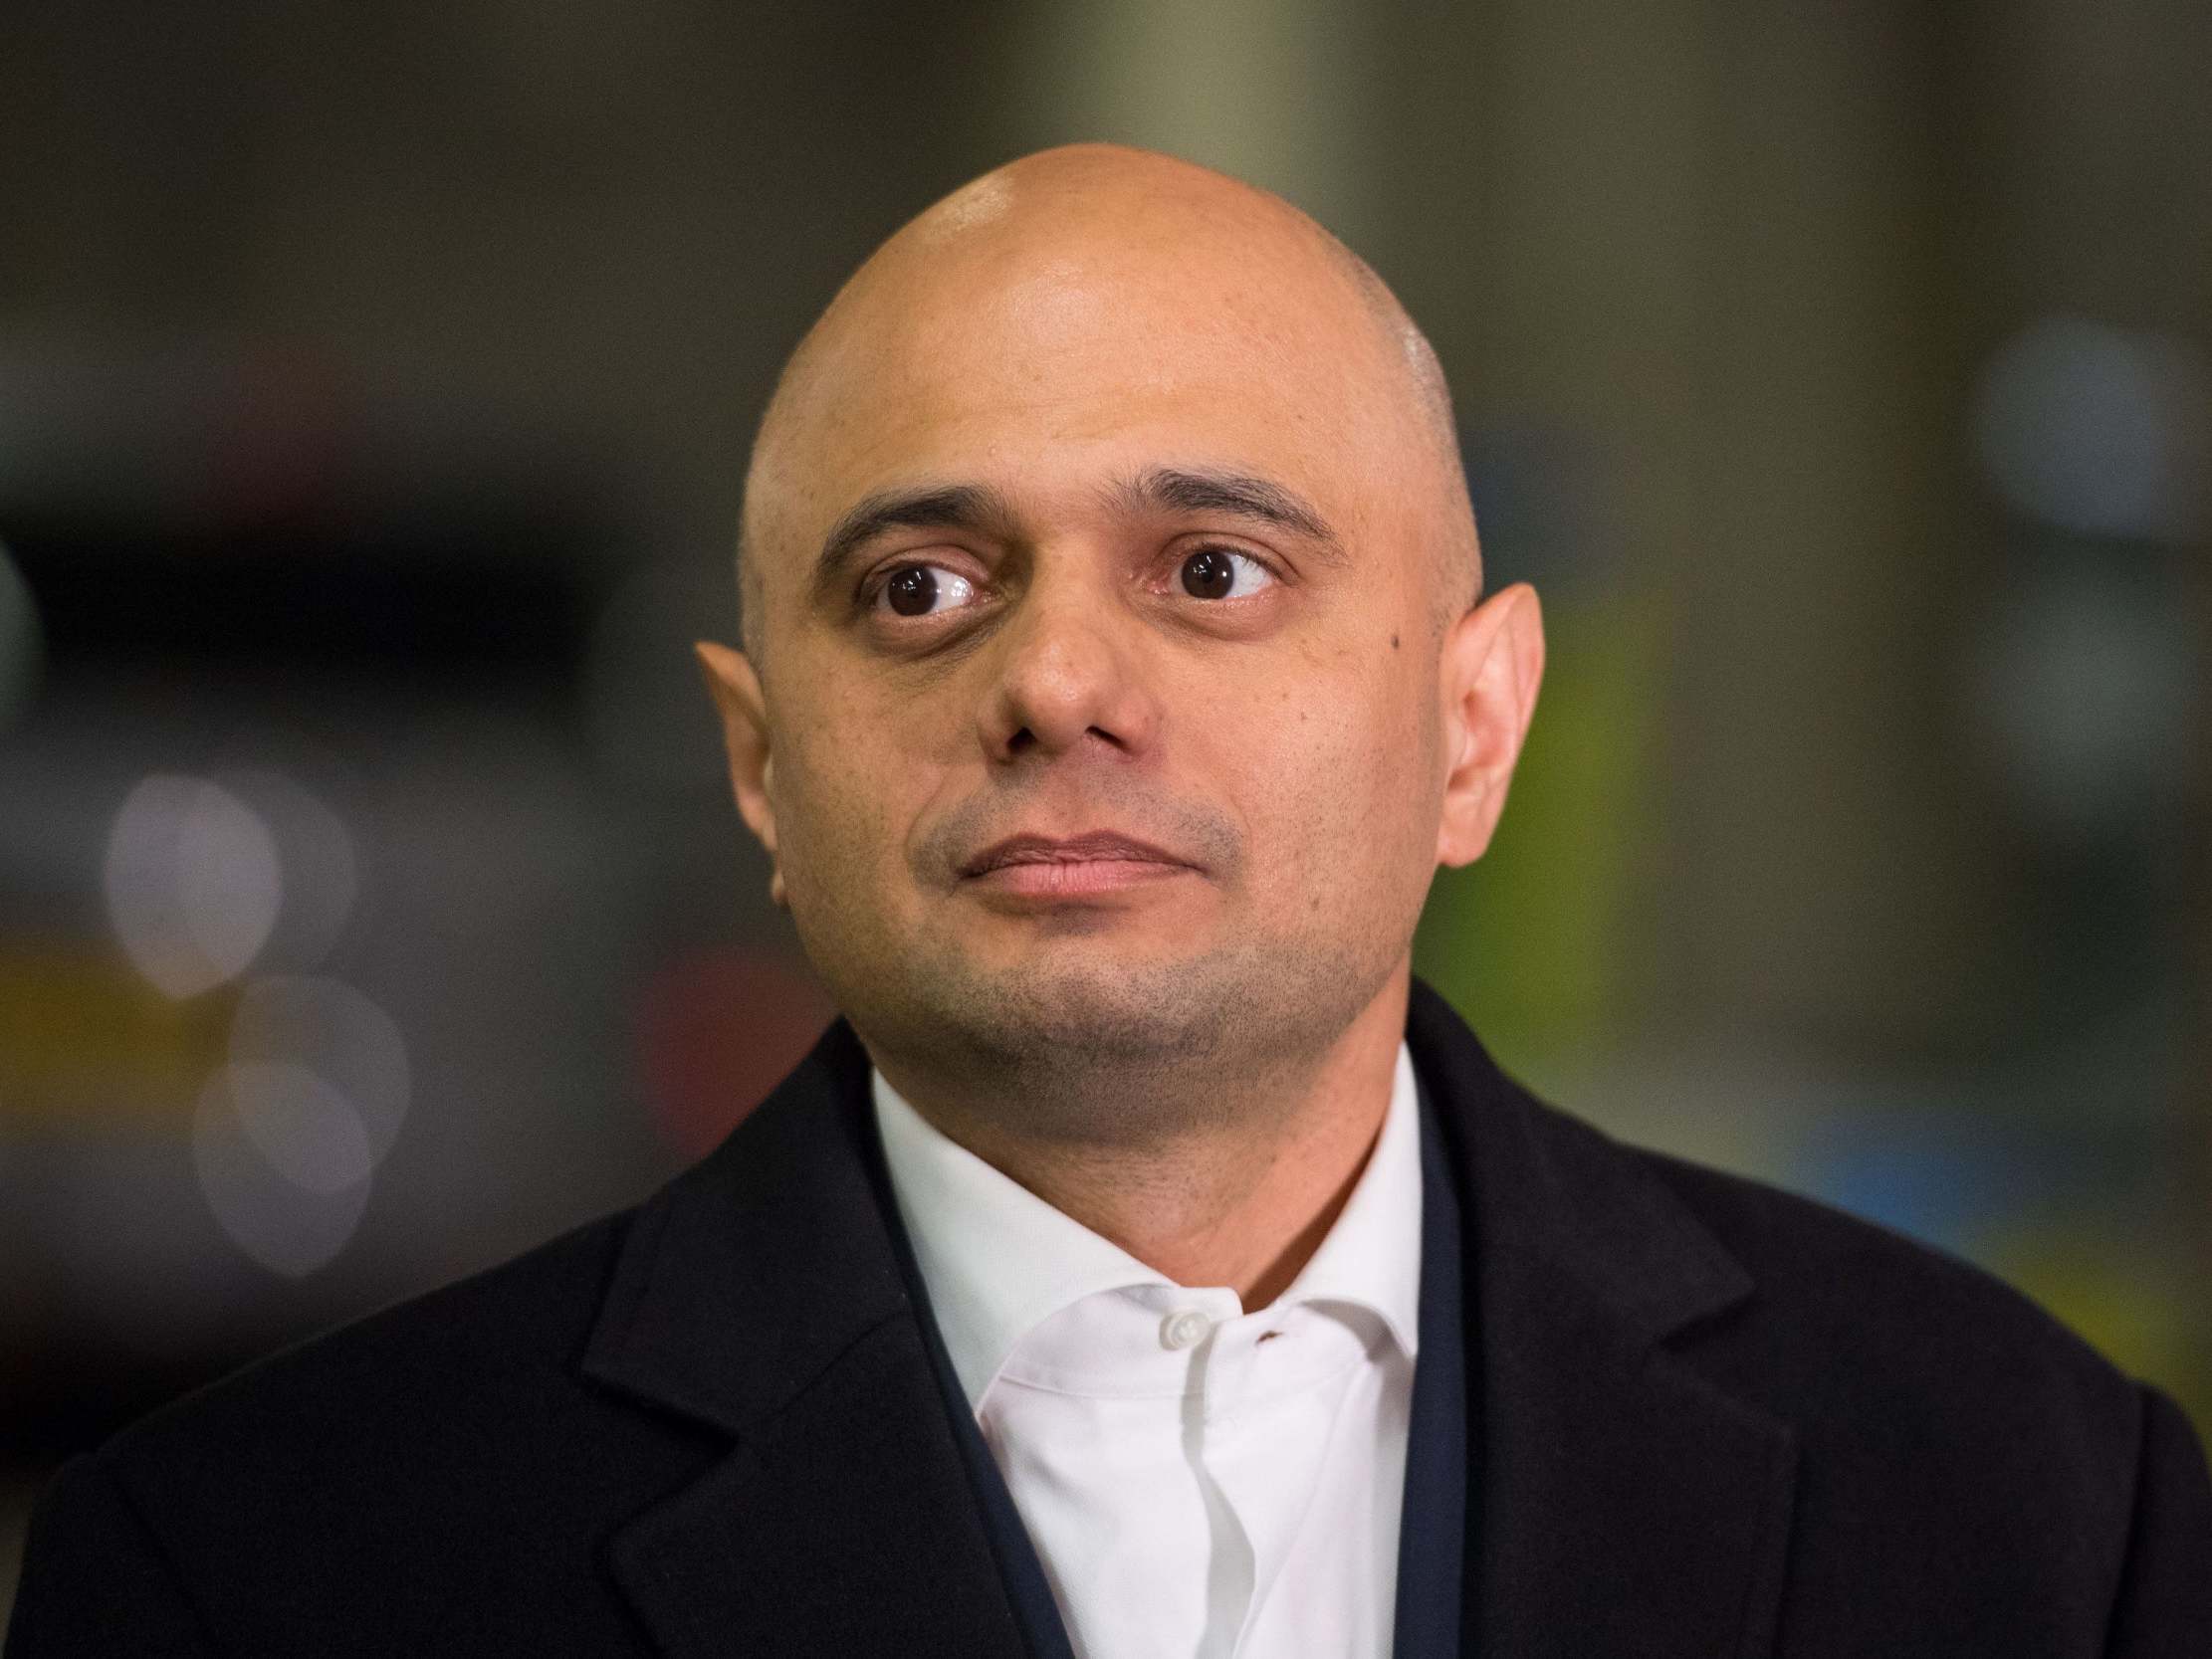 Sajid Javid would not repeat his call for politicians to ‘moderate their language’ for Boris Johnson